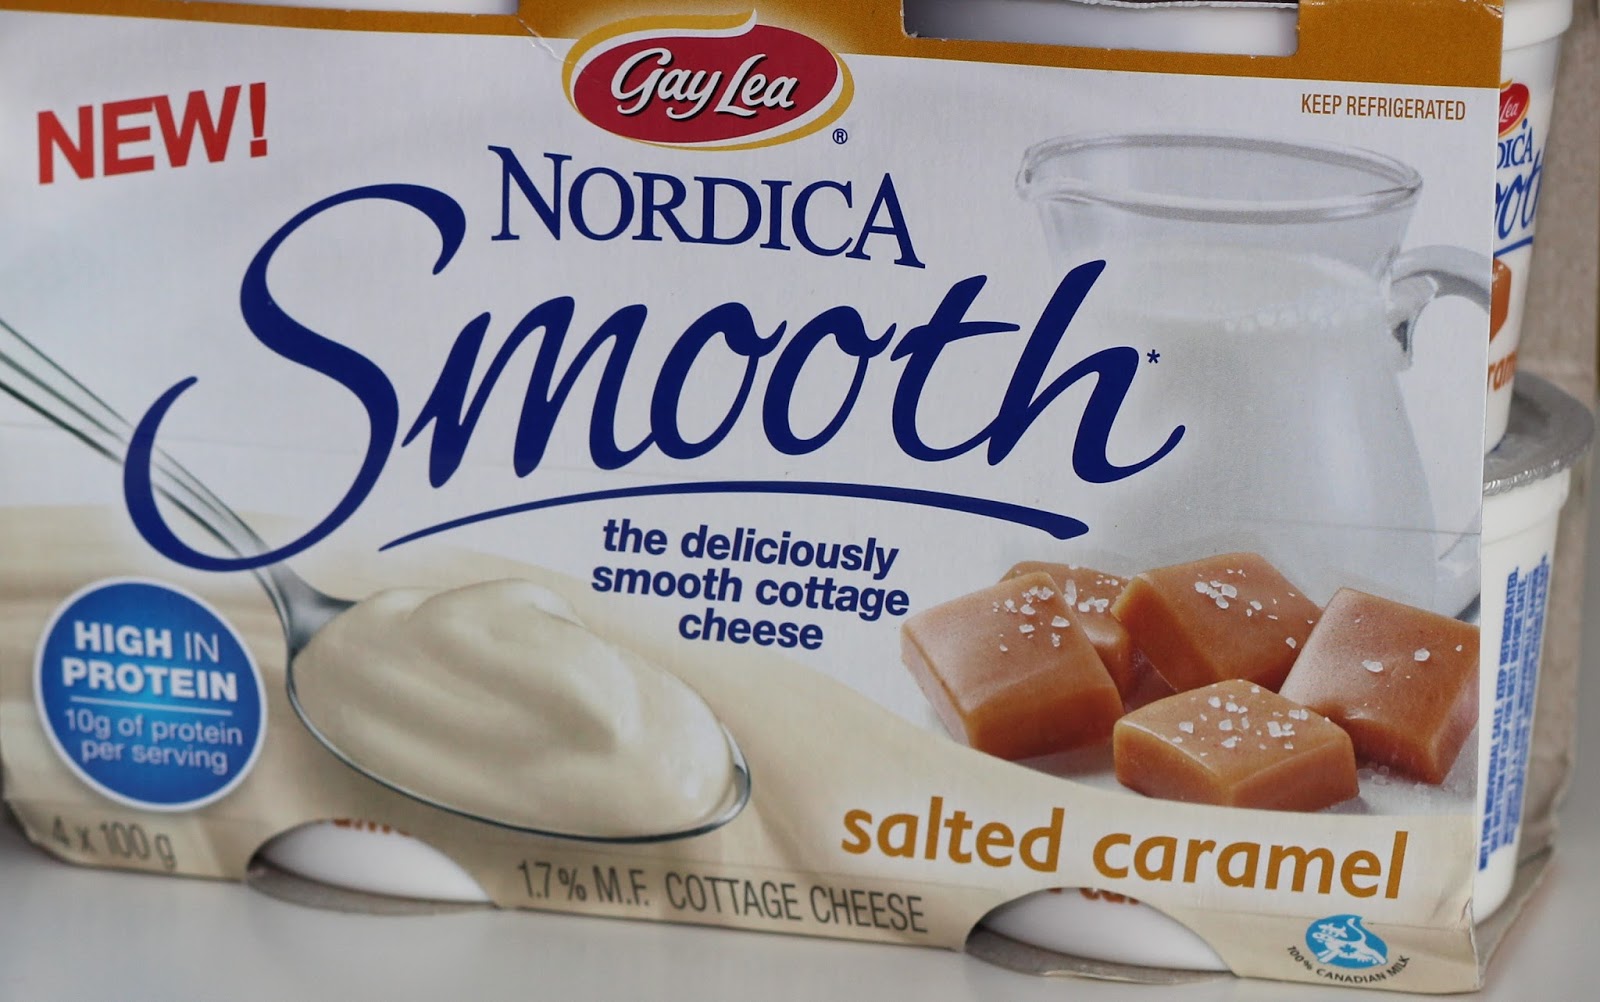 GAY LEA NORDICA SMOOTH COTTAGE CHEESE REVIEW